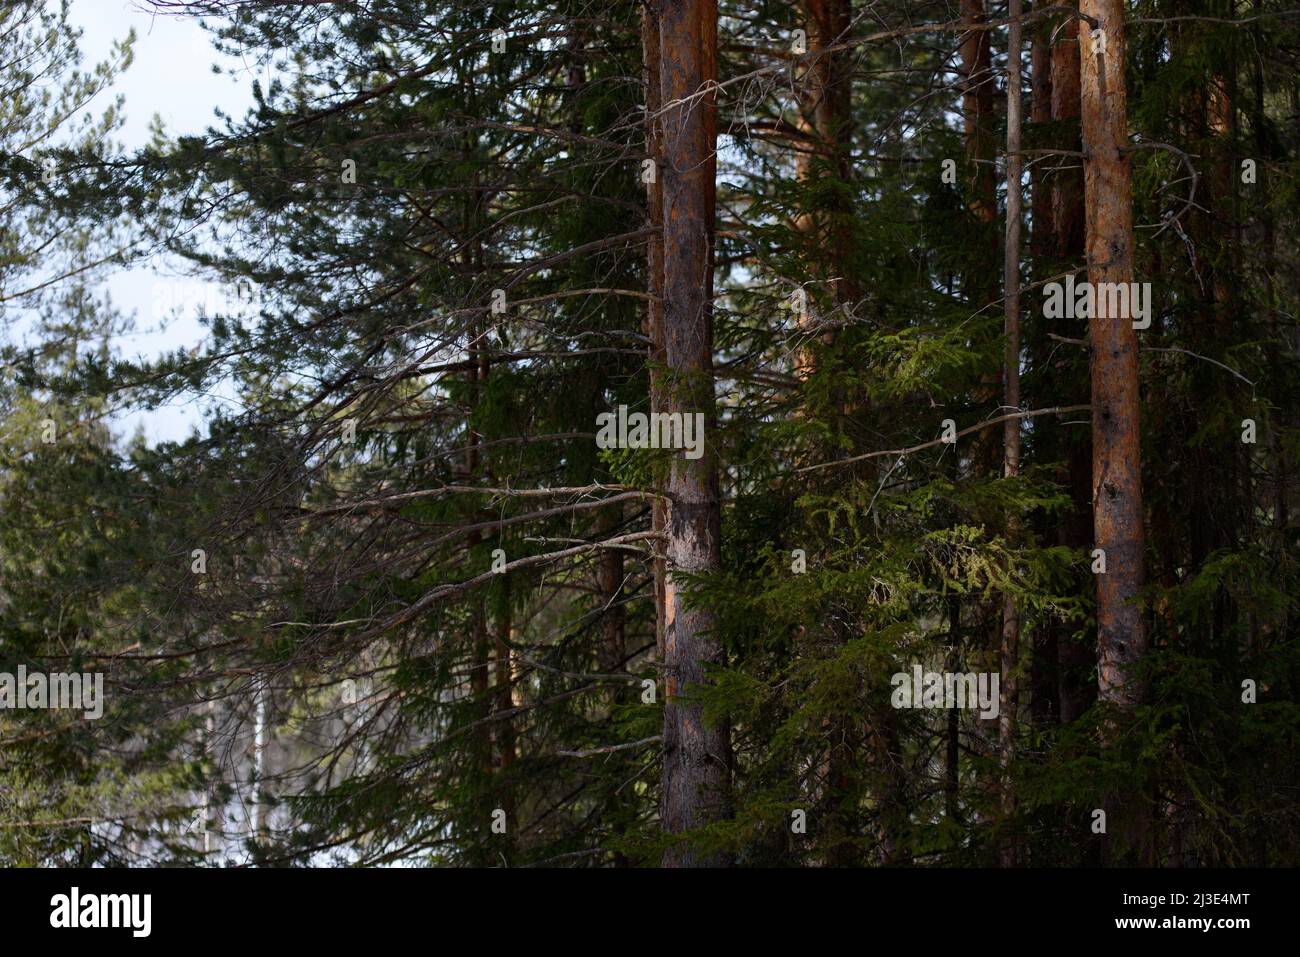 Warm spring light on spruce branches and pine trunks in mid-March in northern latitudes. Stock Photo